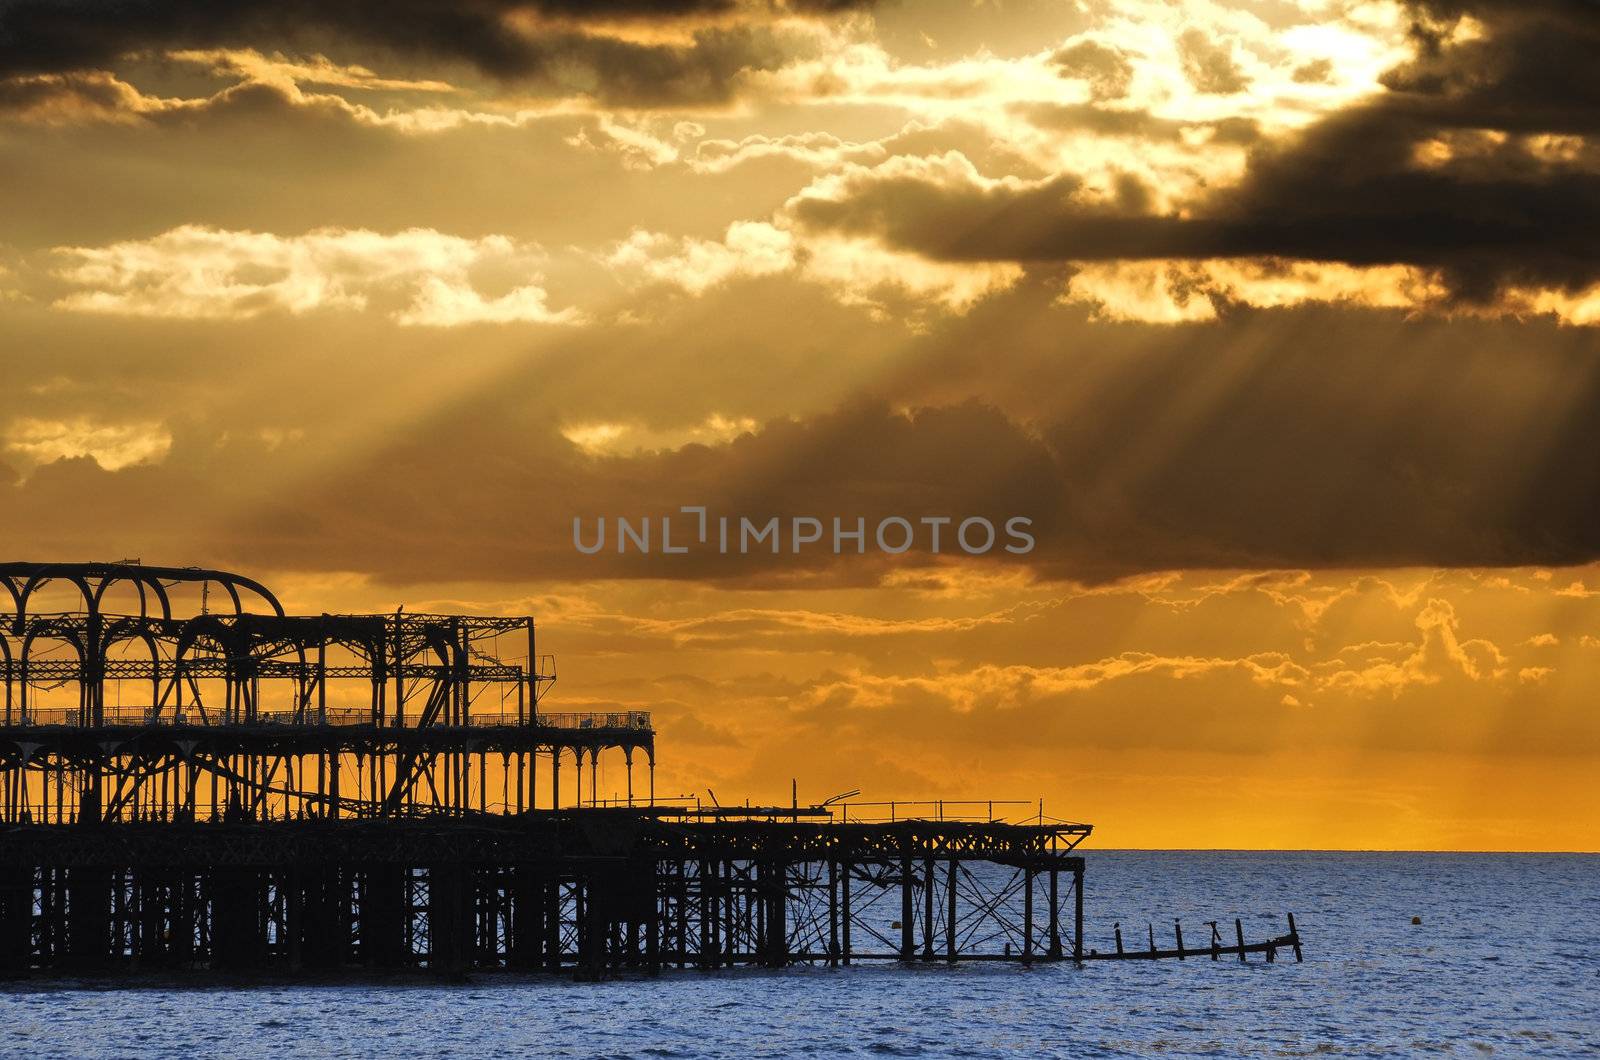 The West Pier in Brighton at sunset by dutourdumonde